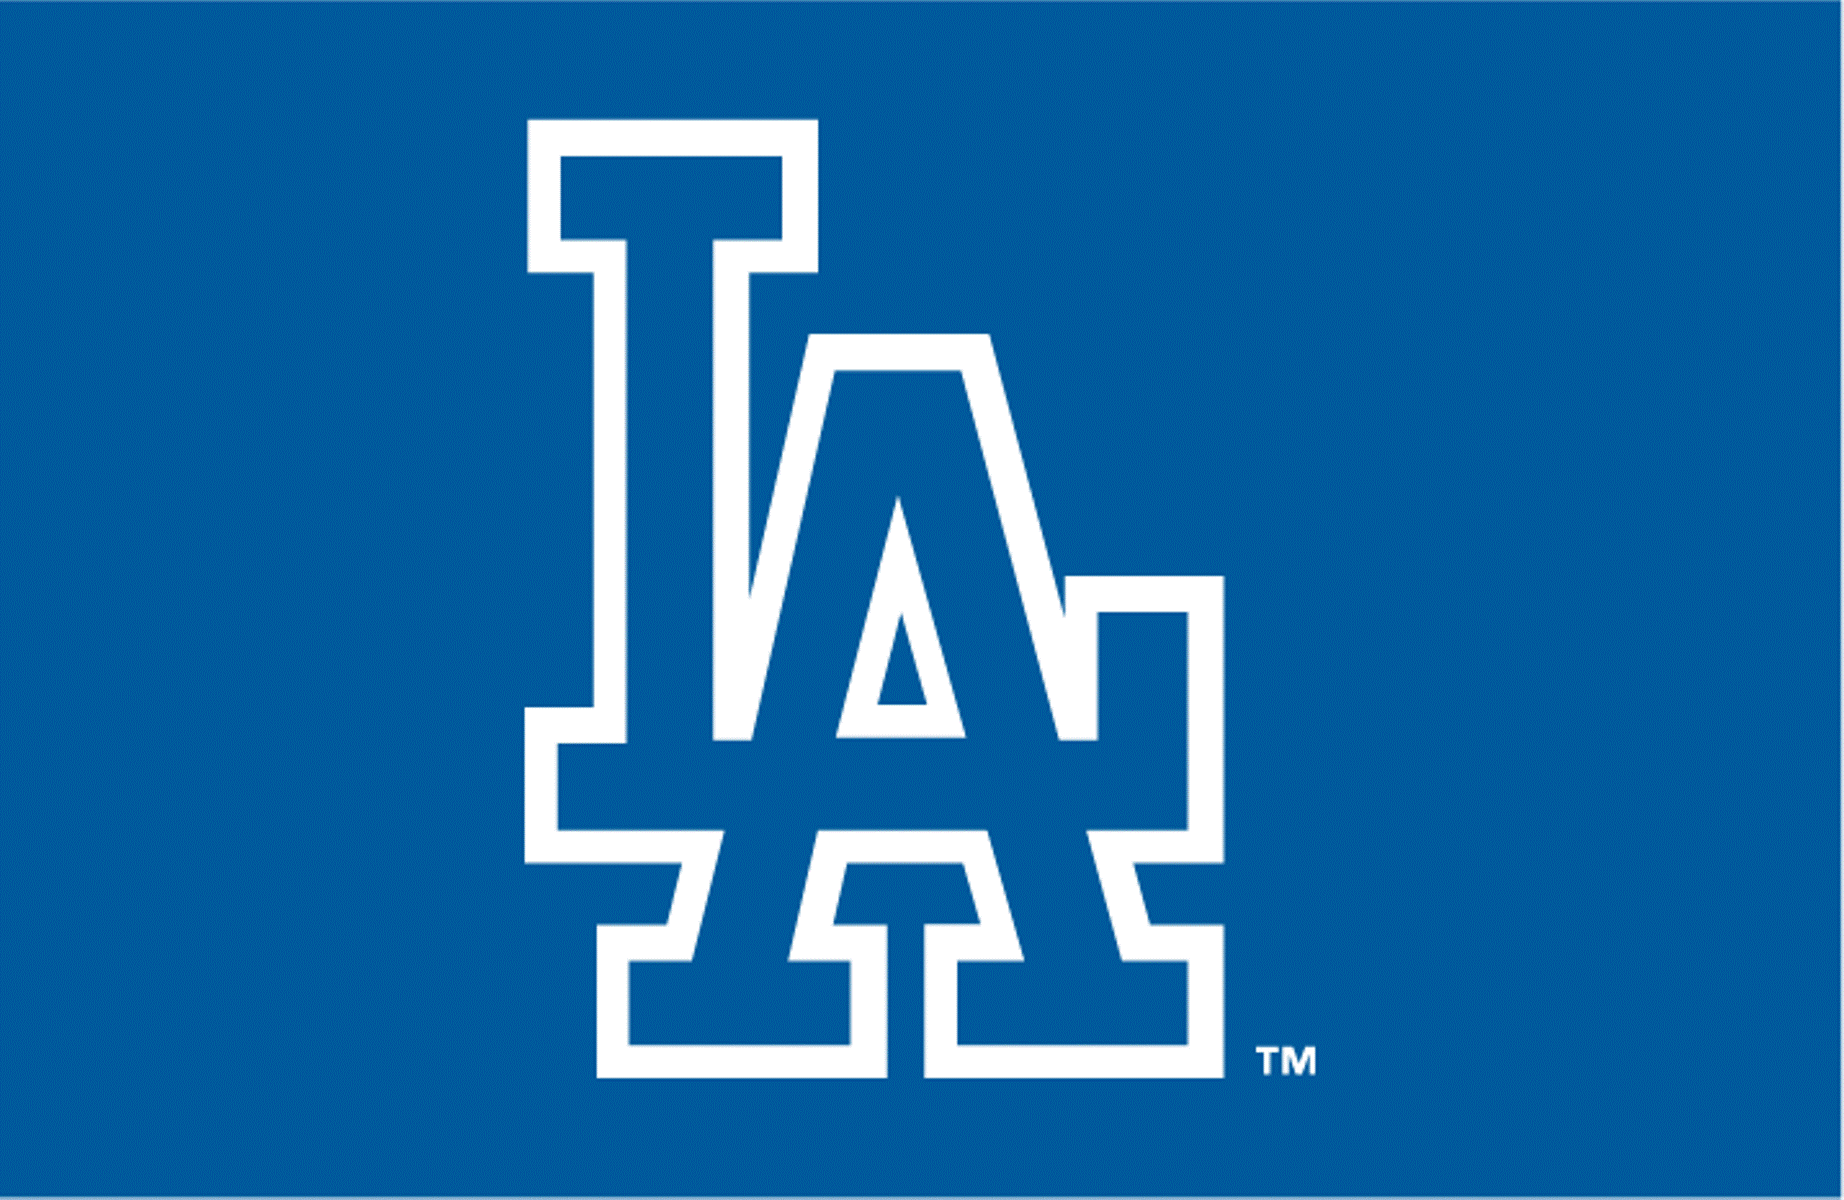 Los Angeles Dodgers Letters LA With Blue Background HD Dodgers Wallpapers   HD Wallpapers  ID 52616